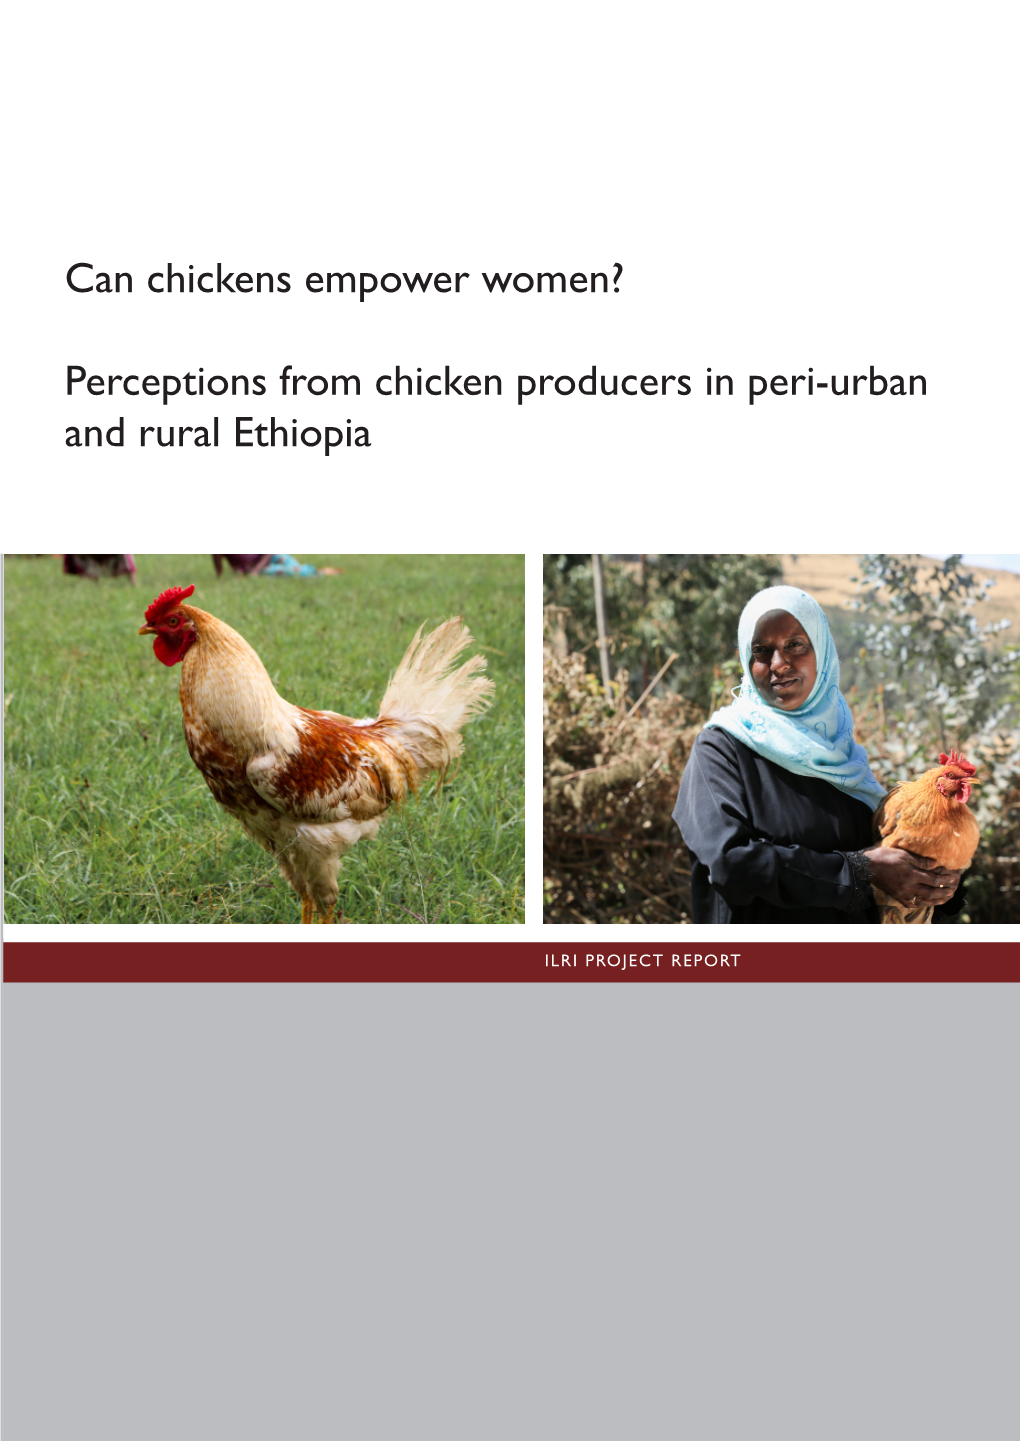 Perceptions from Chicken Producers in Peri-Urban and Rural Ethiopia